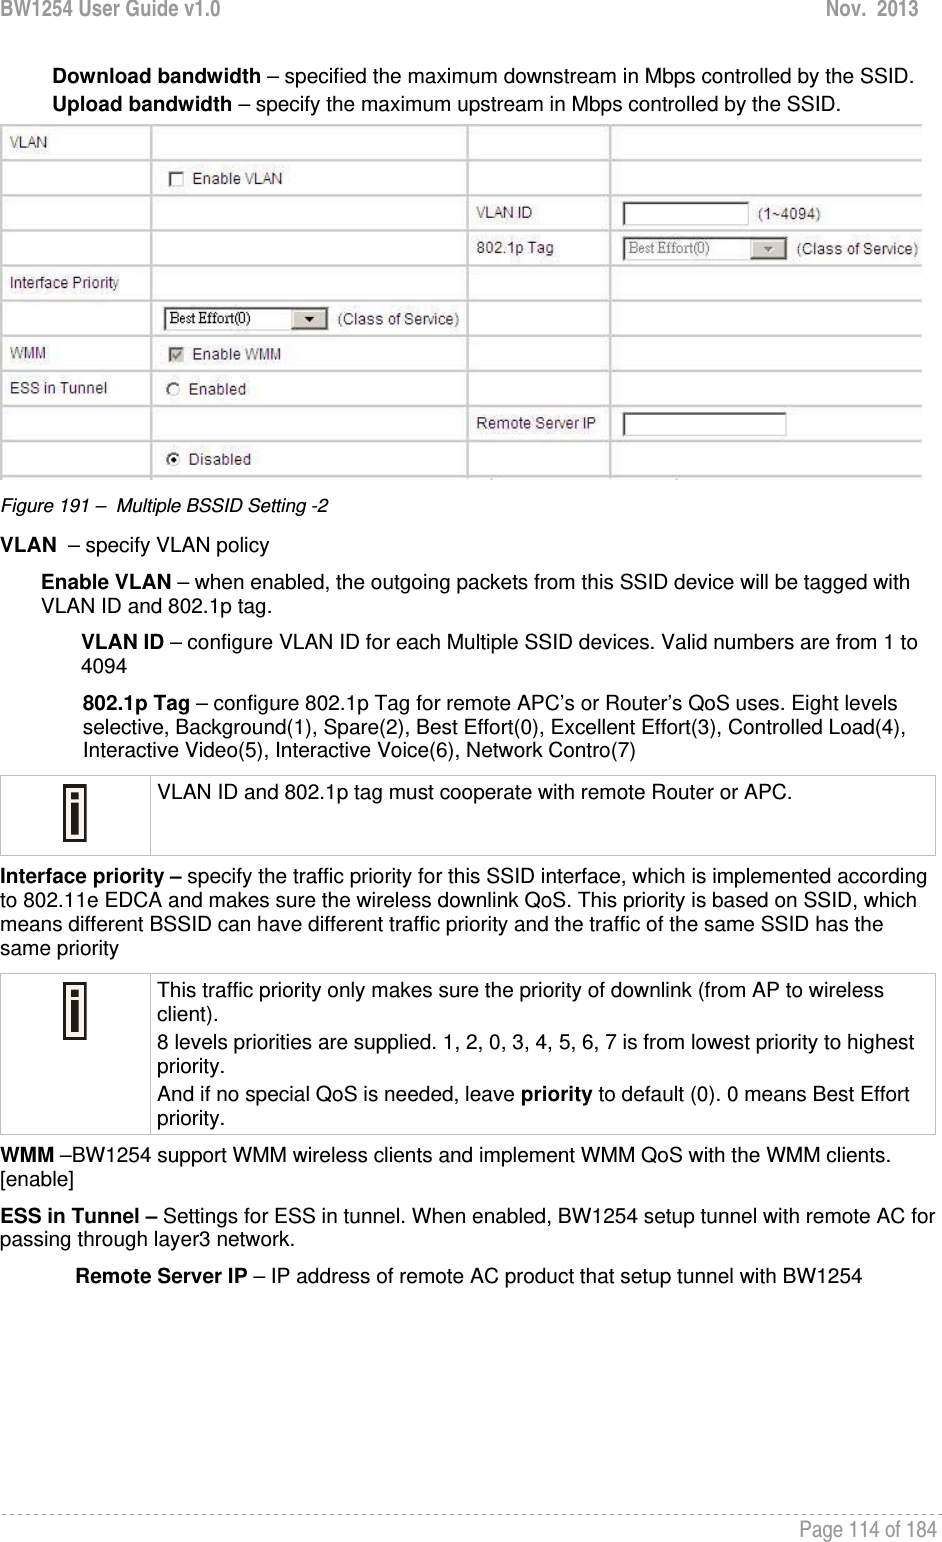 BW1254 User Guide v1.0  Nov.  2013     Page 114 of 184   Download bandwidth – specified the maximum downstream in Mbps controlled by the SSID. Upload bandwidth – specify the maximum upstream in Mbps controlled by the SSID.  Figure 191 –  Multiple BSSID Setting -2 VLAN  – specify VLAN policy  Enable VLAN – when enabled, the outgoing packets from this SSID device will be tagged with VLAN ID and 802.1p tag.  VLAN ID – configure VLAN ID for each Multiple SSID devices. Valid numbers are from 1 to 4094 802.1p Tag – configure 802.1p Tag for remote APC’s or Router’s QoS uses. Eight levels selective, Background(1), Spare(2), Best Effort(0), Excellent Effort(3), Controlled Load(4), Interactive Video(5), Interactive Voice(6), Network Contro(7)  VLAN ID and 802.1p tag must cooperate with remote Router or APC.  Interface priority – specify the traffic priority for this SSID interface, which is implemented according to 802.11e EDCA and makes sure the wireless downlink QoS. This priority is based on SSID, which means different BSSID can have different traffic priority and the traffic of the same SSID has the same priority  This traffic priority only makes sure the priority of downlink (from AP to wireless client). 8 levels priorities are supplied. 1, 2, 0, 3, 4, 5, 6, 7 is from lowest priority to highest priority.  And if no special QoS is needed, leave priority to default (0). 0 means Best Effort priority.  WMM –BW1254 support WMM wireless clients and implement WMM QoS with the WMM clients. [enable] ESS in Tunnel – Settings for ESS in tunnel. When enabled, BW1254 setup tunnel with remote AC for passing through layer3 network.  Remote Server IP – IP address of remote AC product that setup tunnel with BW1254 